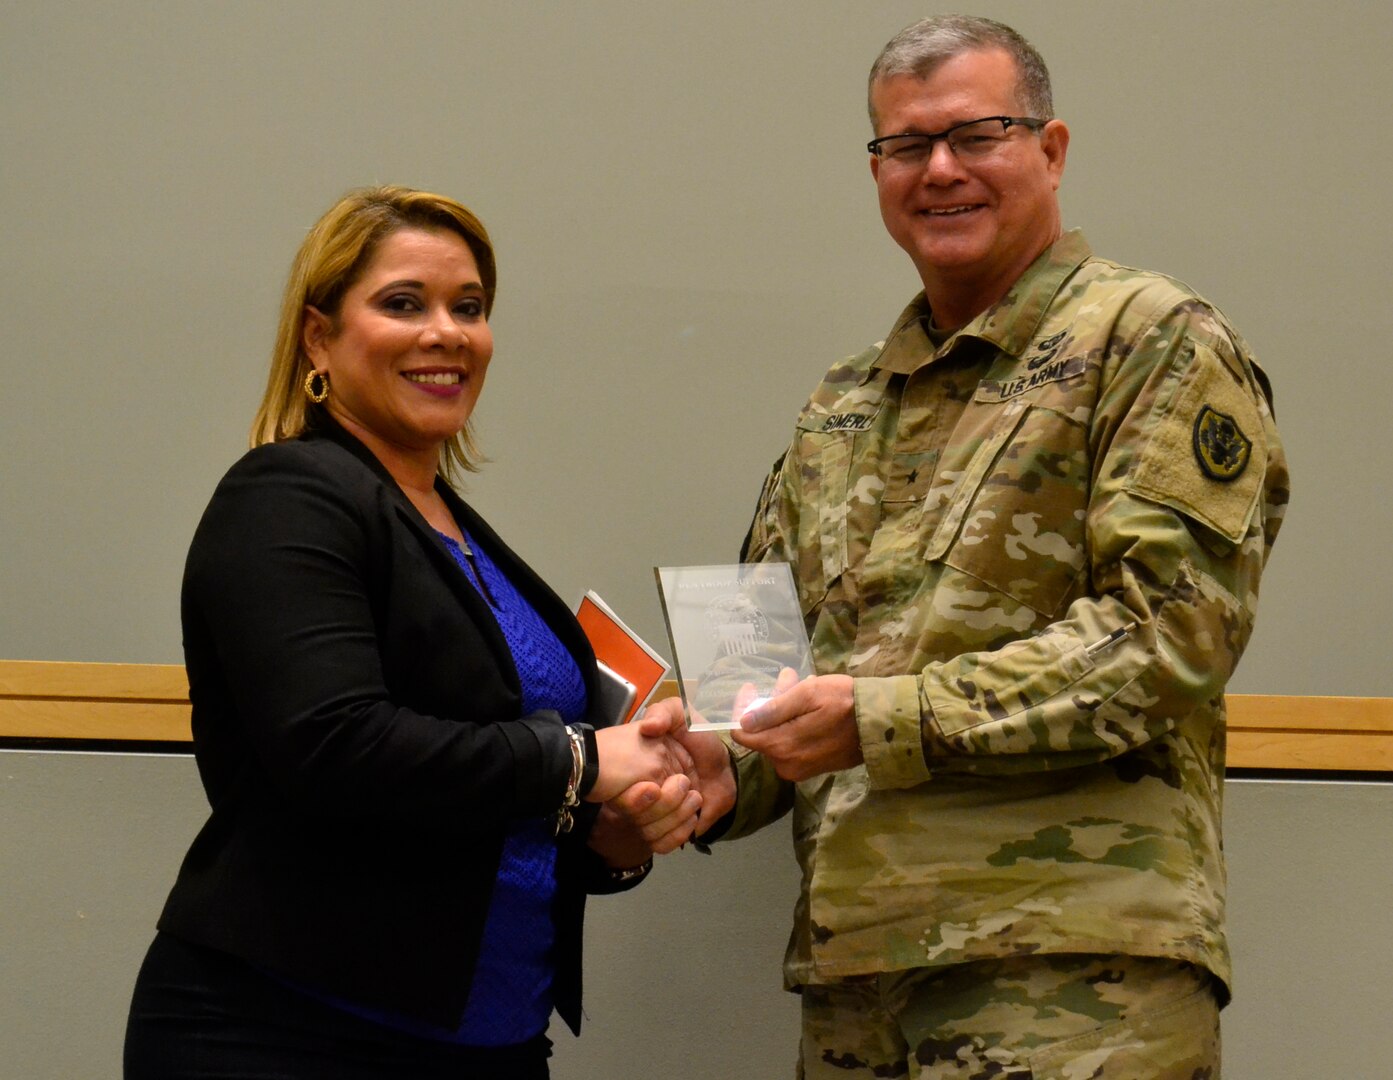 Joanna Otero-Cruz receives an award from Army Brig. Gen. Mark Simerly, DLA Troop commander, during this year’s Hispanic Heritage Month program in Philadelphia October 11, 2018.